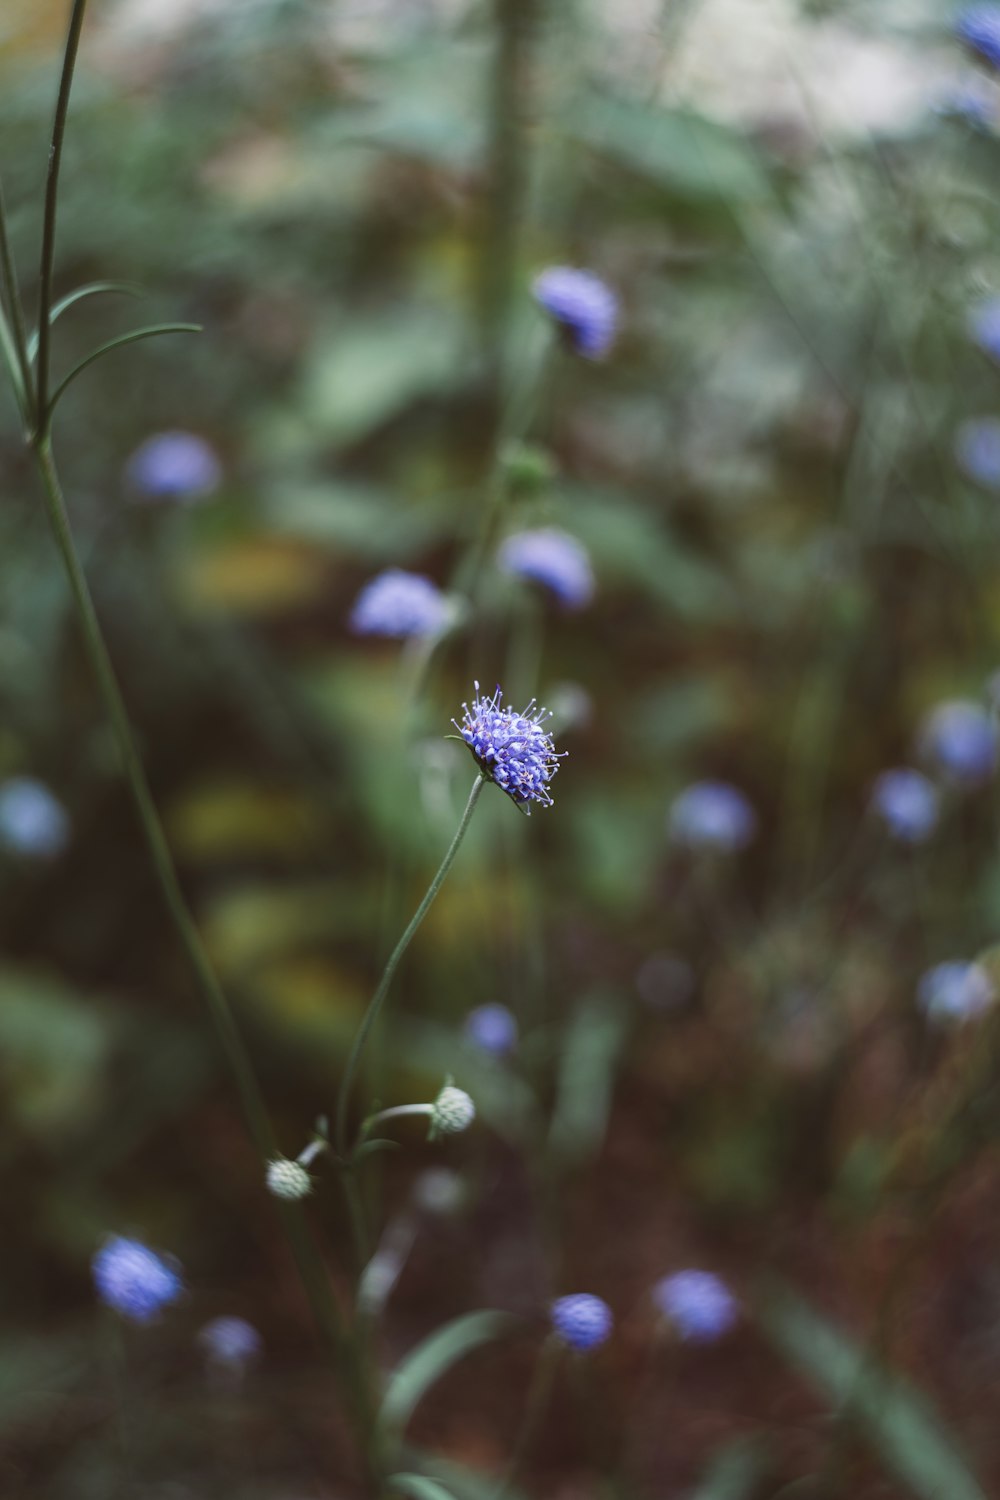 a close up of a blue flower in a field